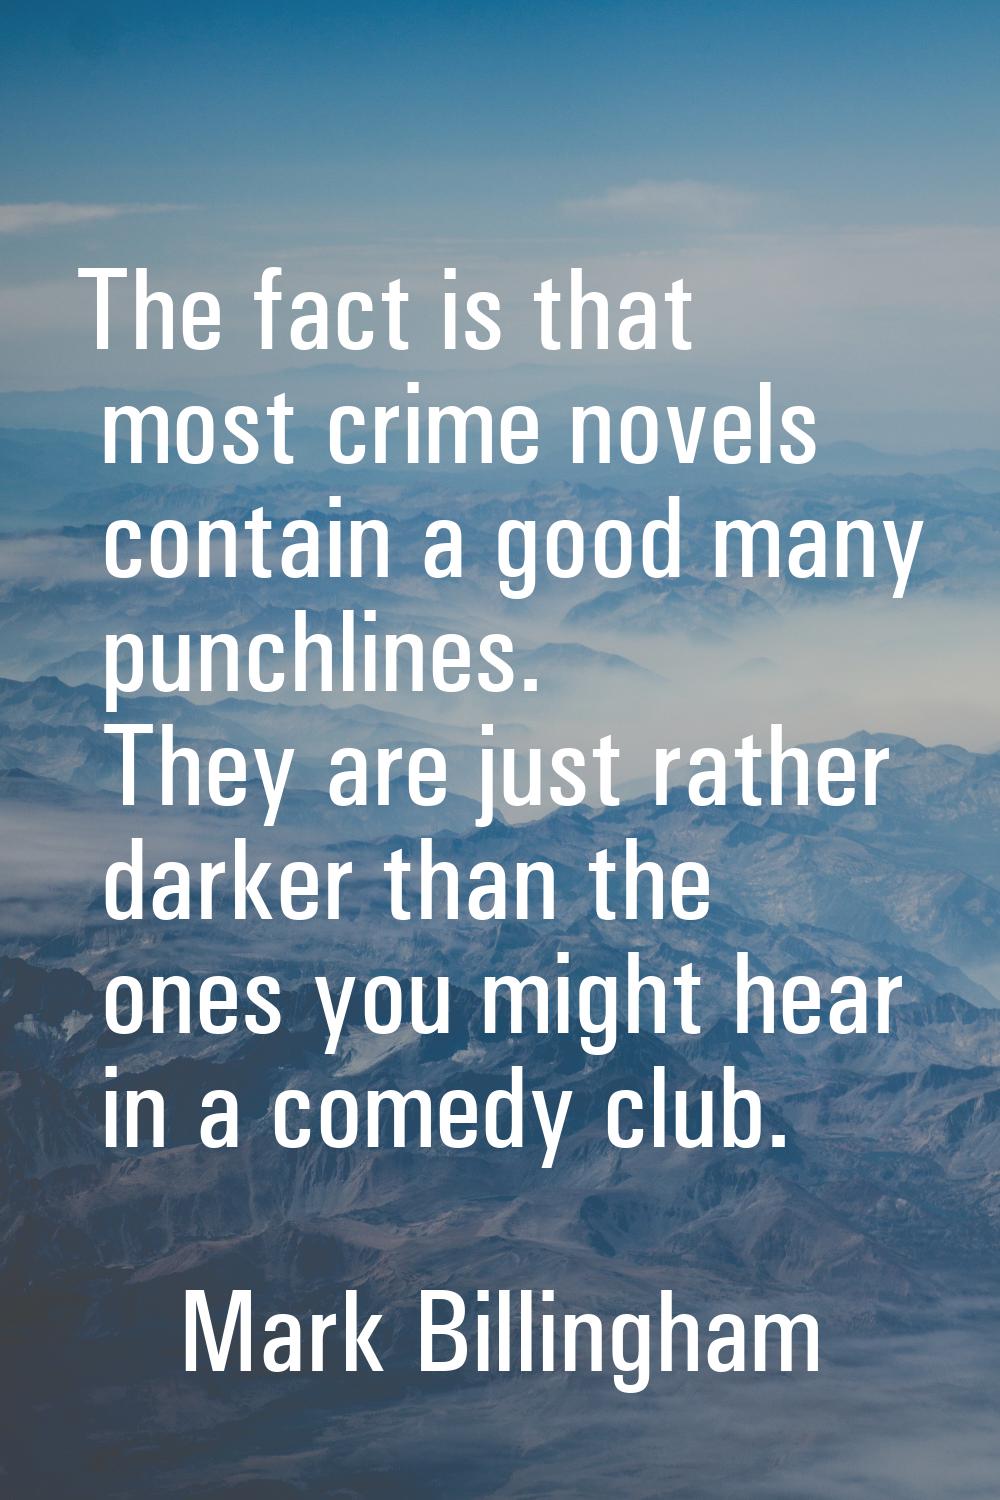 The fact is that most crime novels contain a good many punchlines. They are just rather darker than